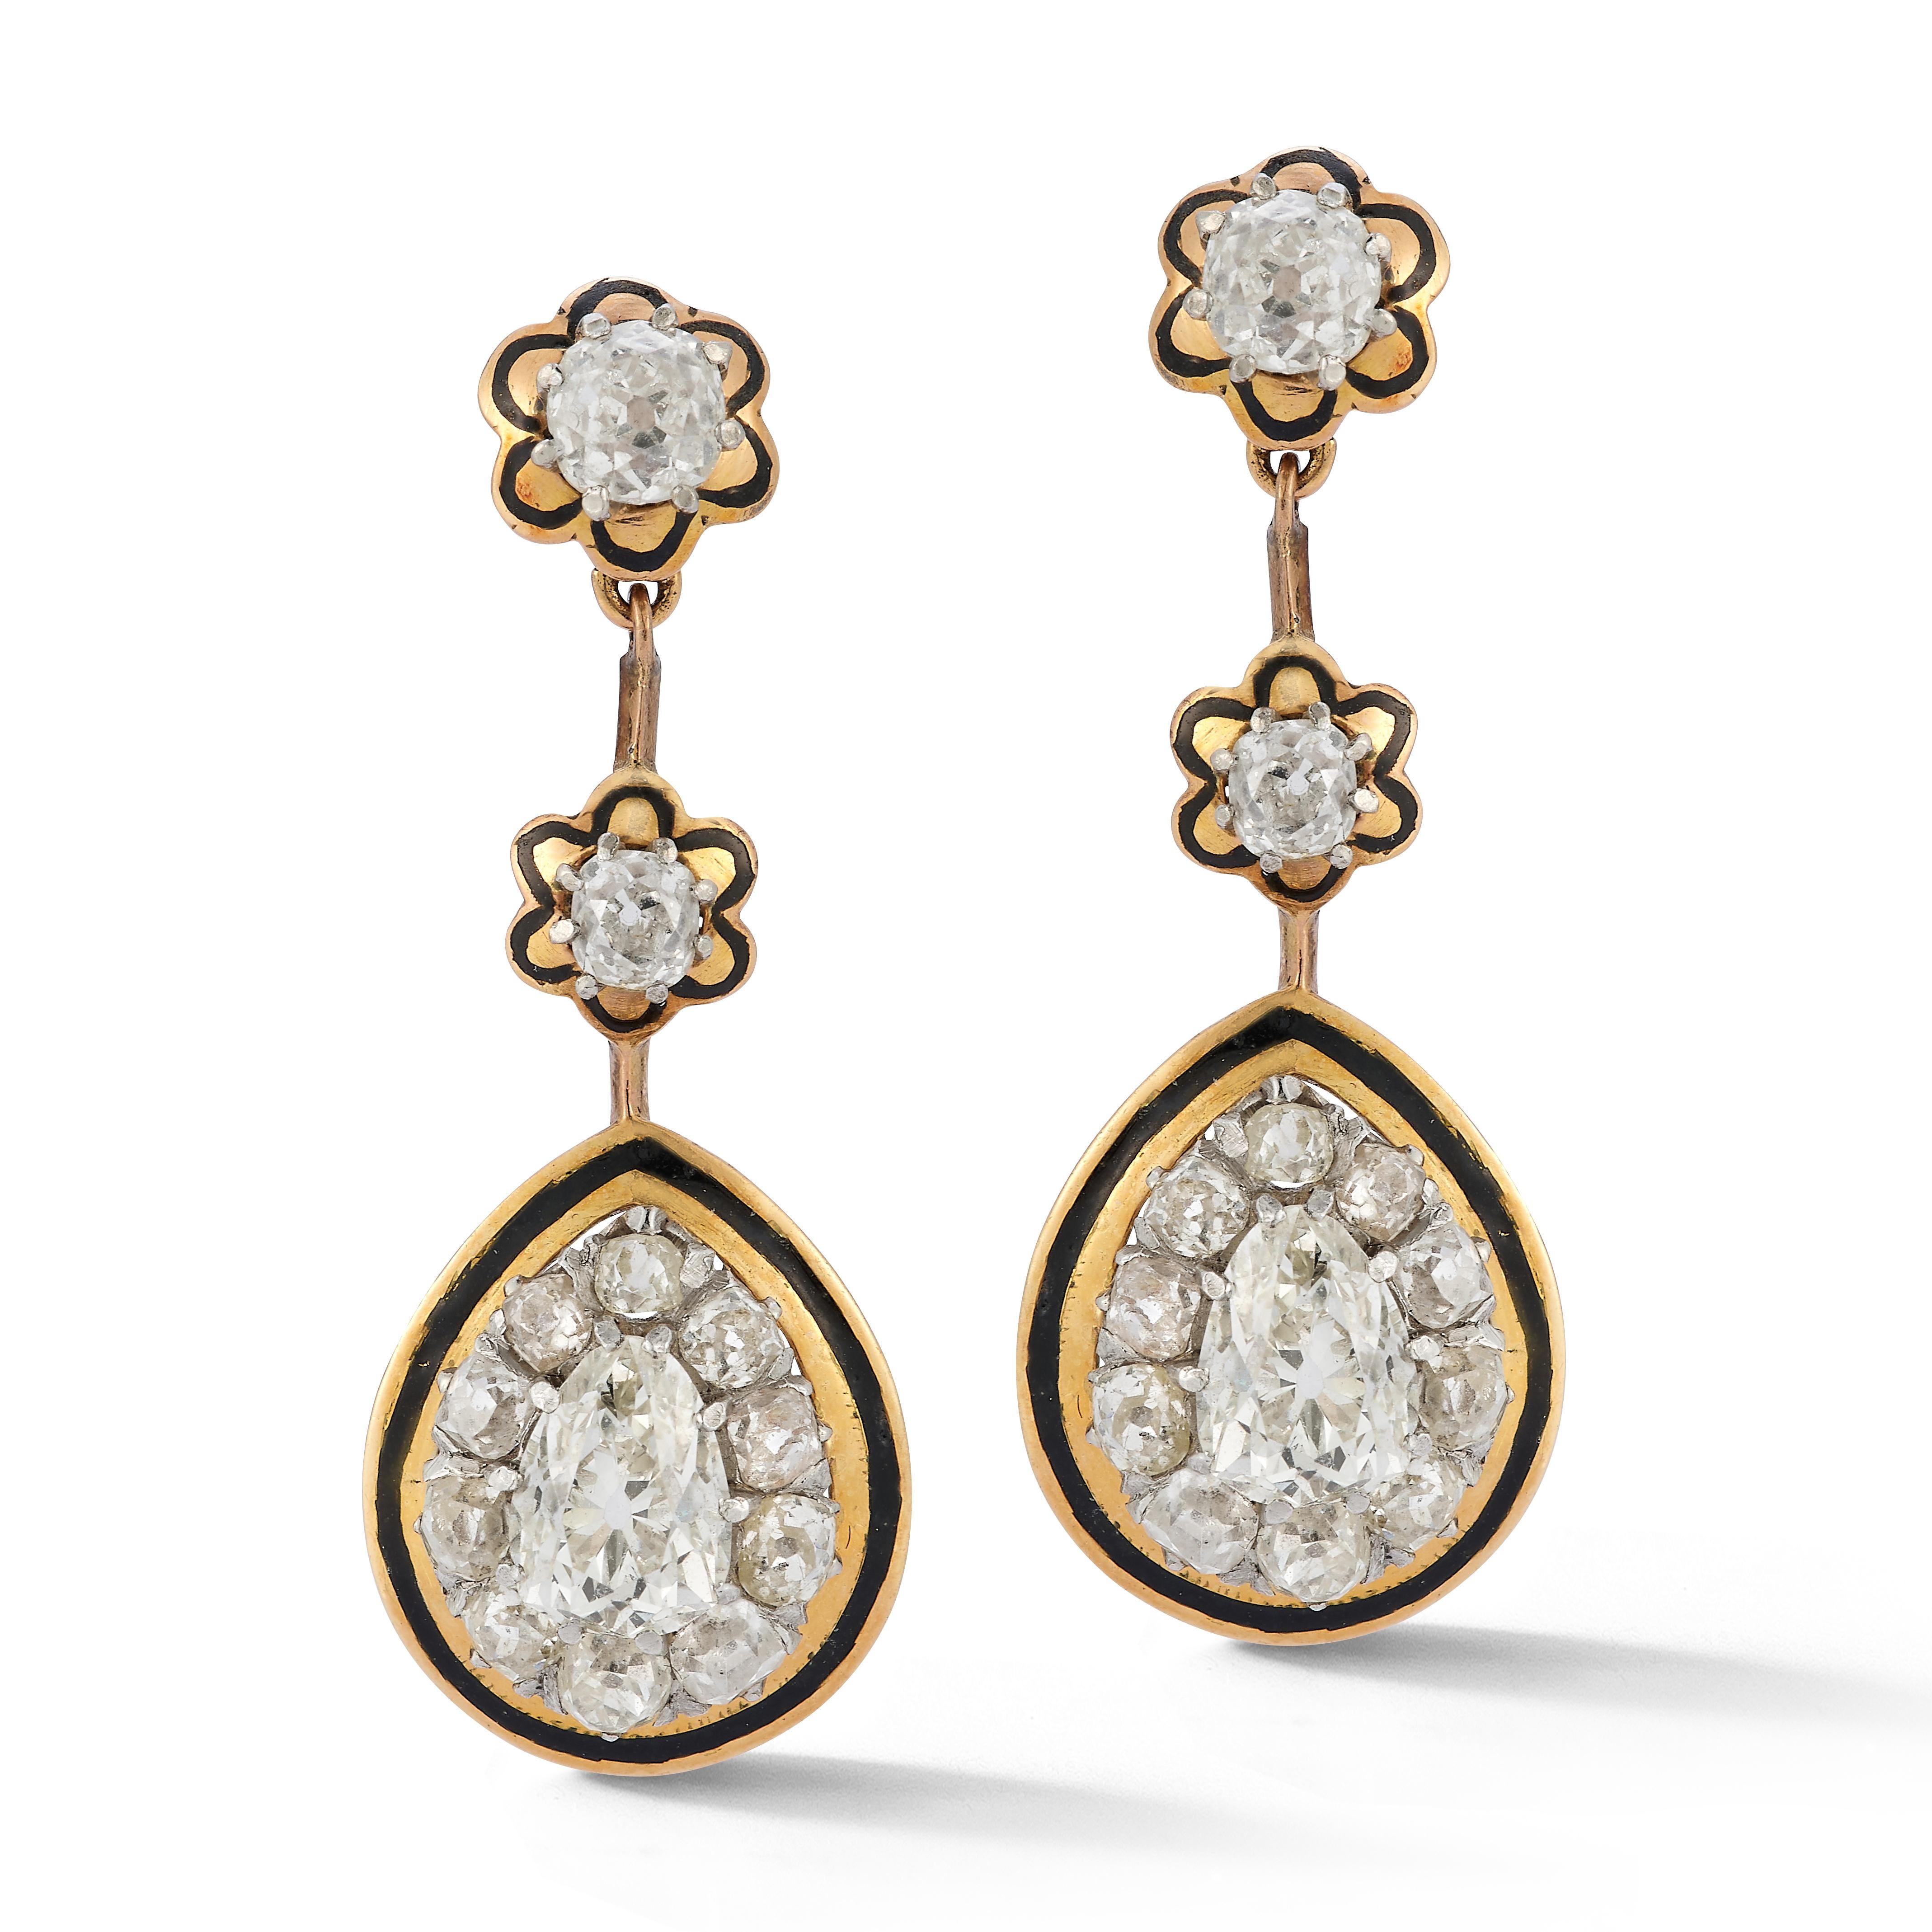 Victorian Antique Cut Diamond & Enamel Earrings

A pair of 18 karat yellow gold and enamel earrings set with 2 pear shaped diamonds weighing approximately 1.95 carats and 24 old mine diamonds weighing approximately 2.93 carats

Circa 1900

Length: